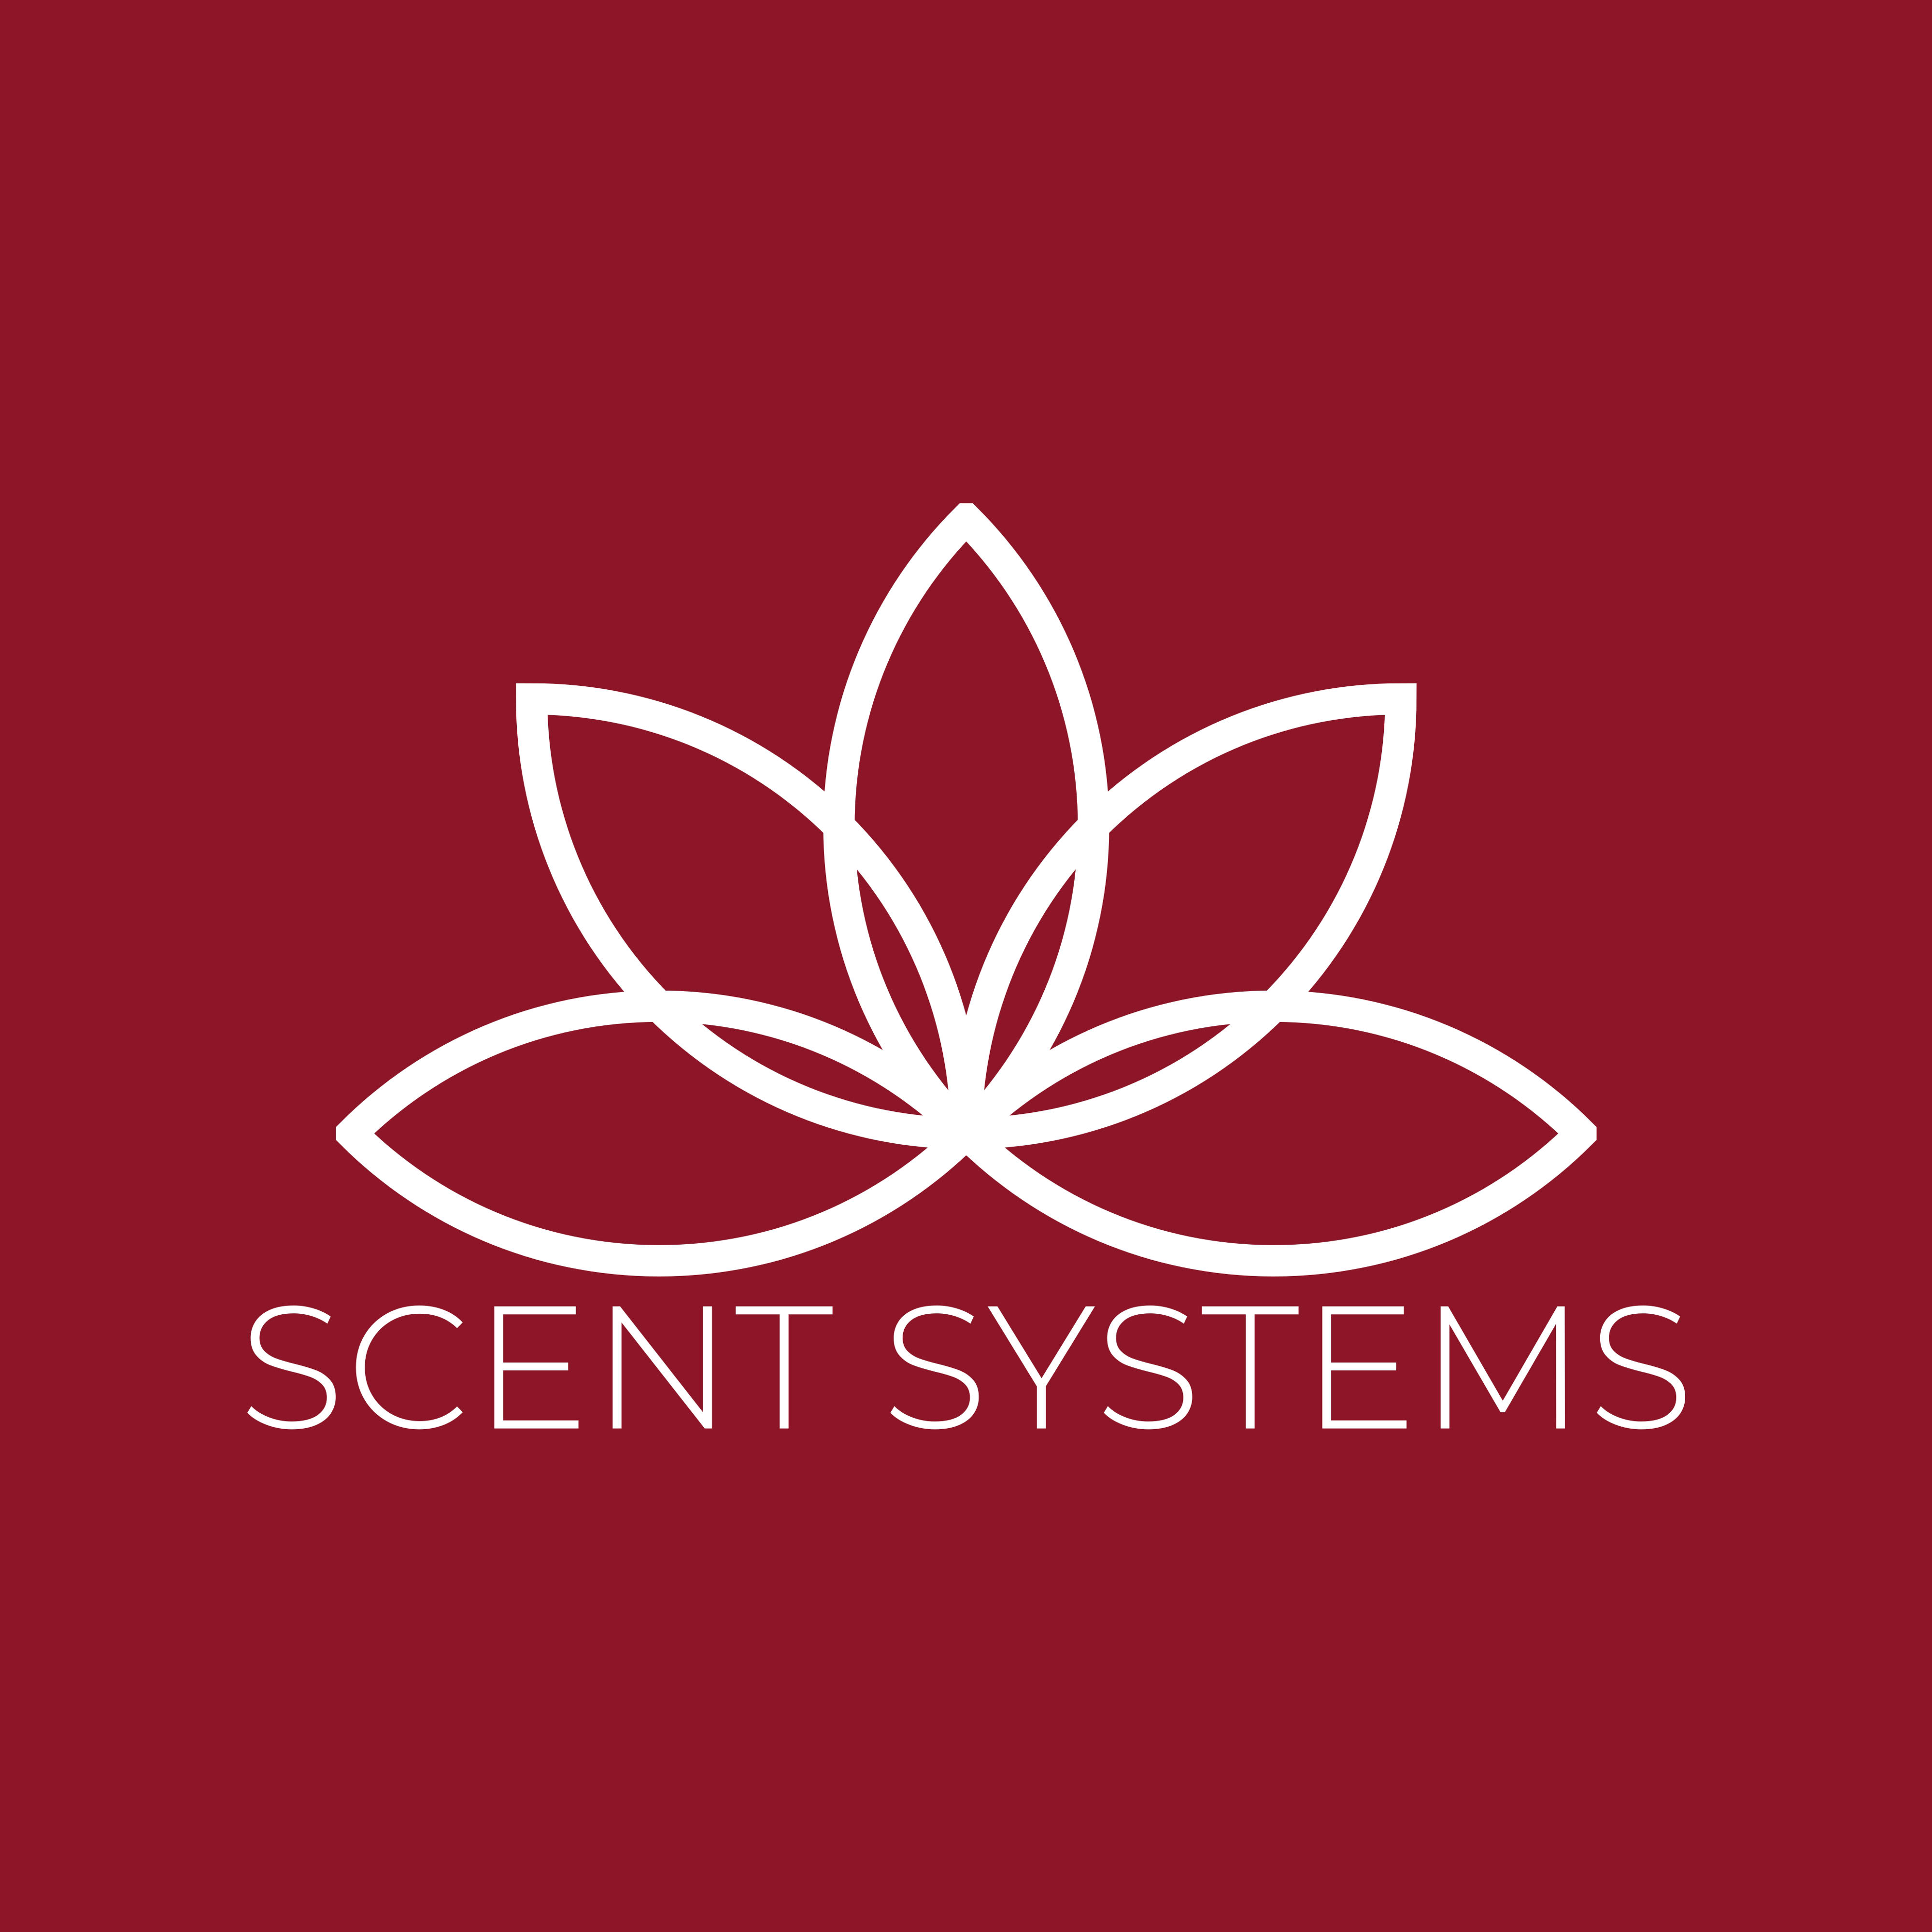 Scent Systems